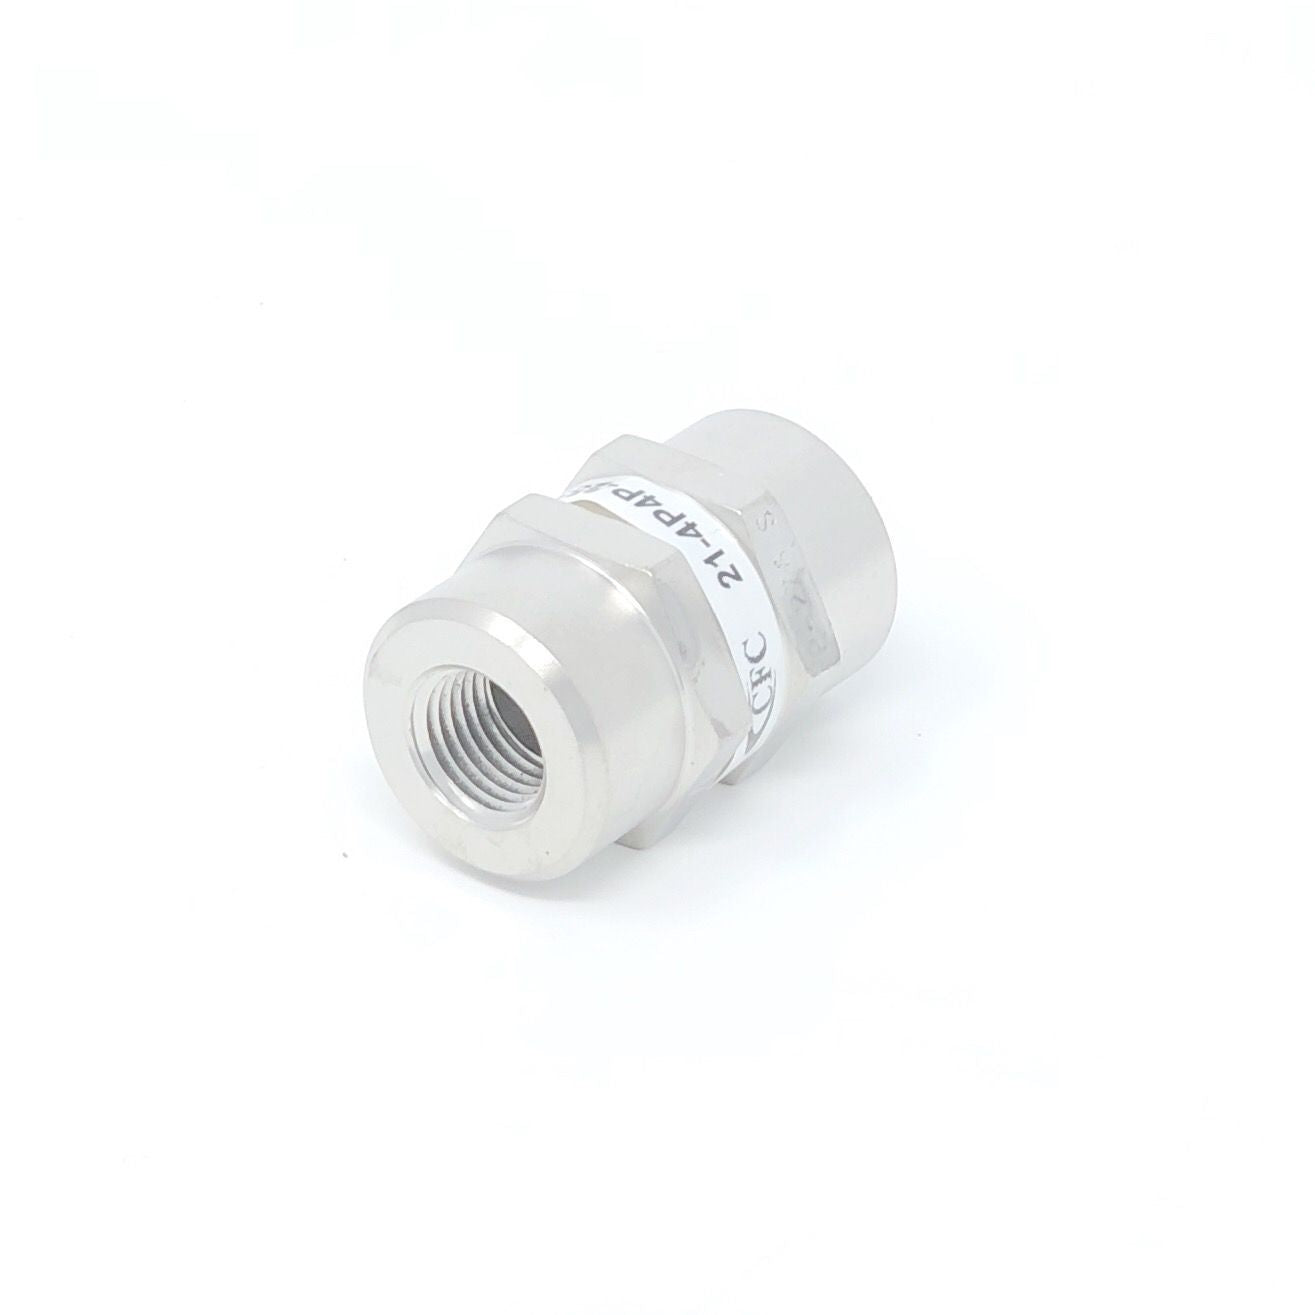 21-12N12N-18S : Chase High Pressure Inline Filter, 3000psi, 3/4" NPT, 18 Micron, No Visual Indicator, No Bypass